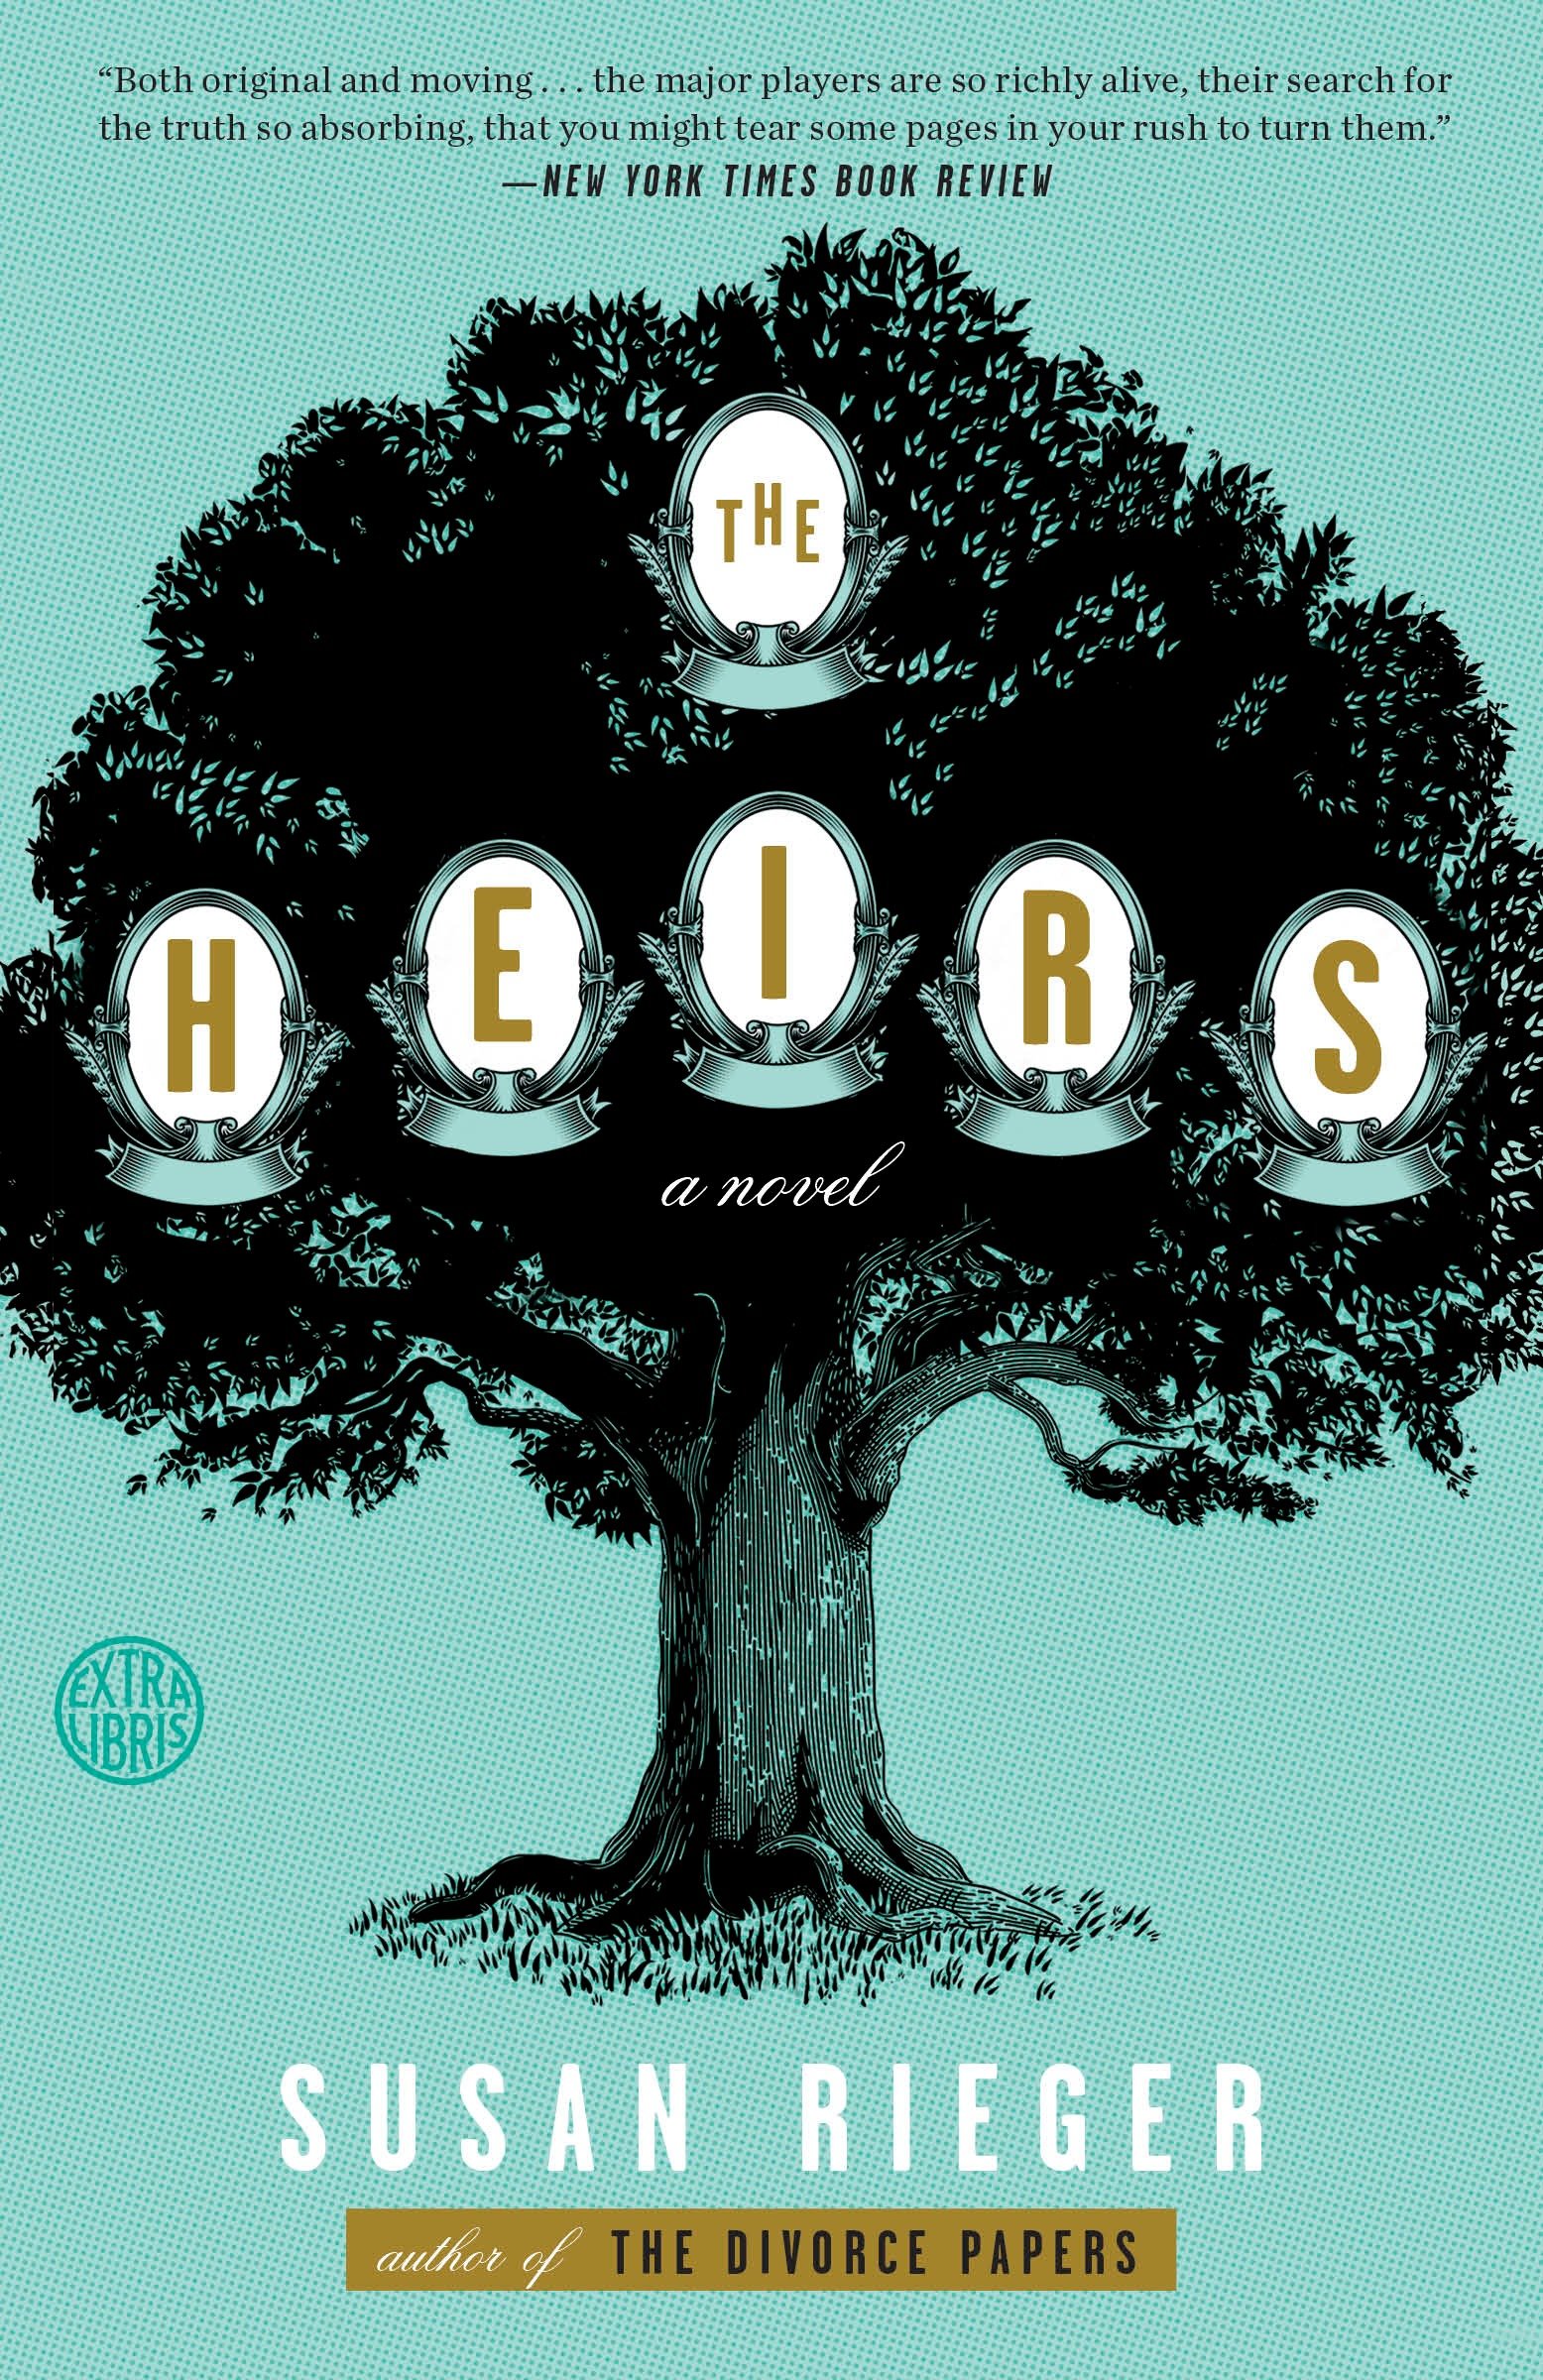 The heirs cover image